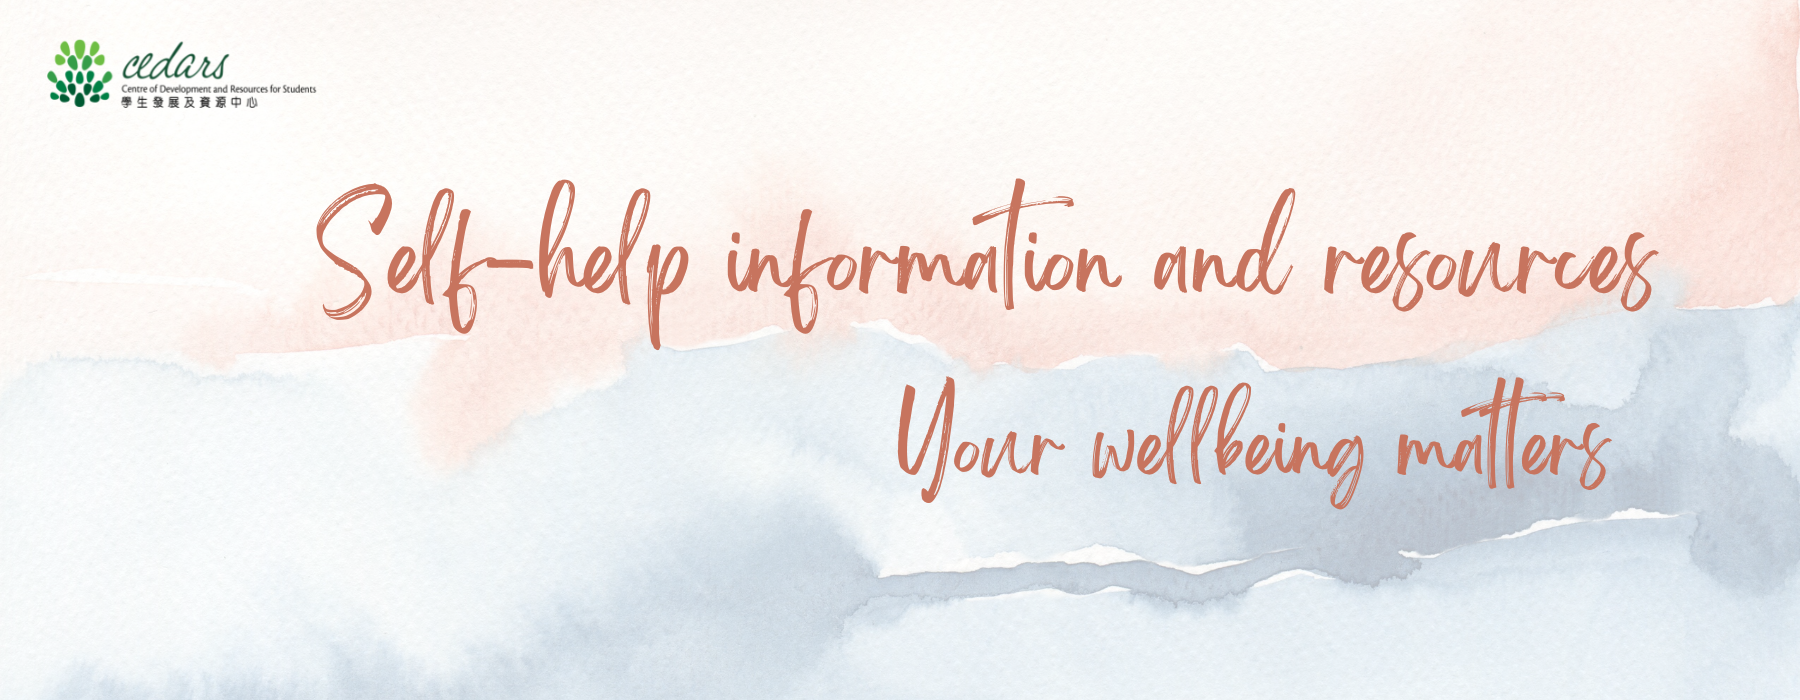 A banner link to self-help information